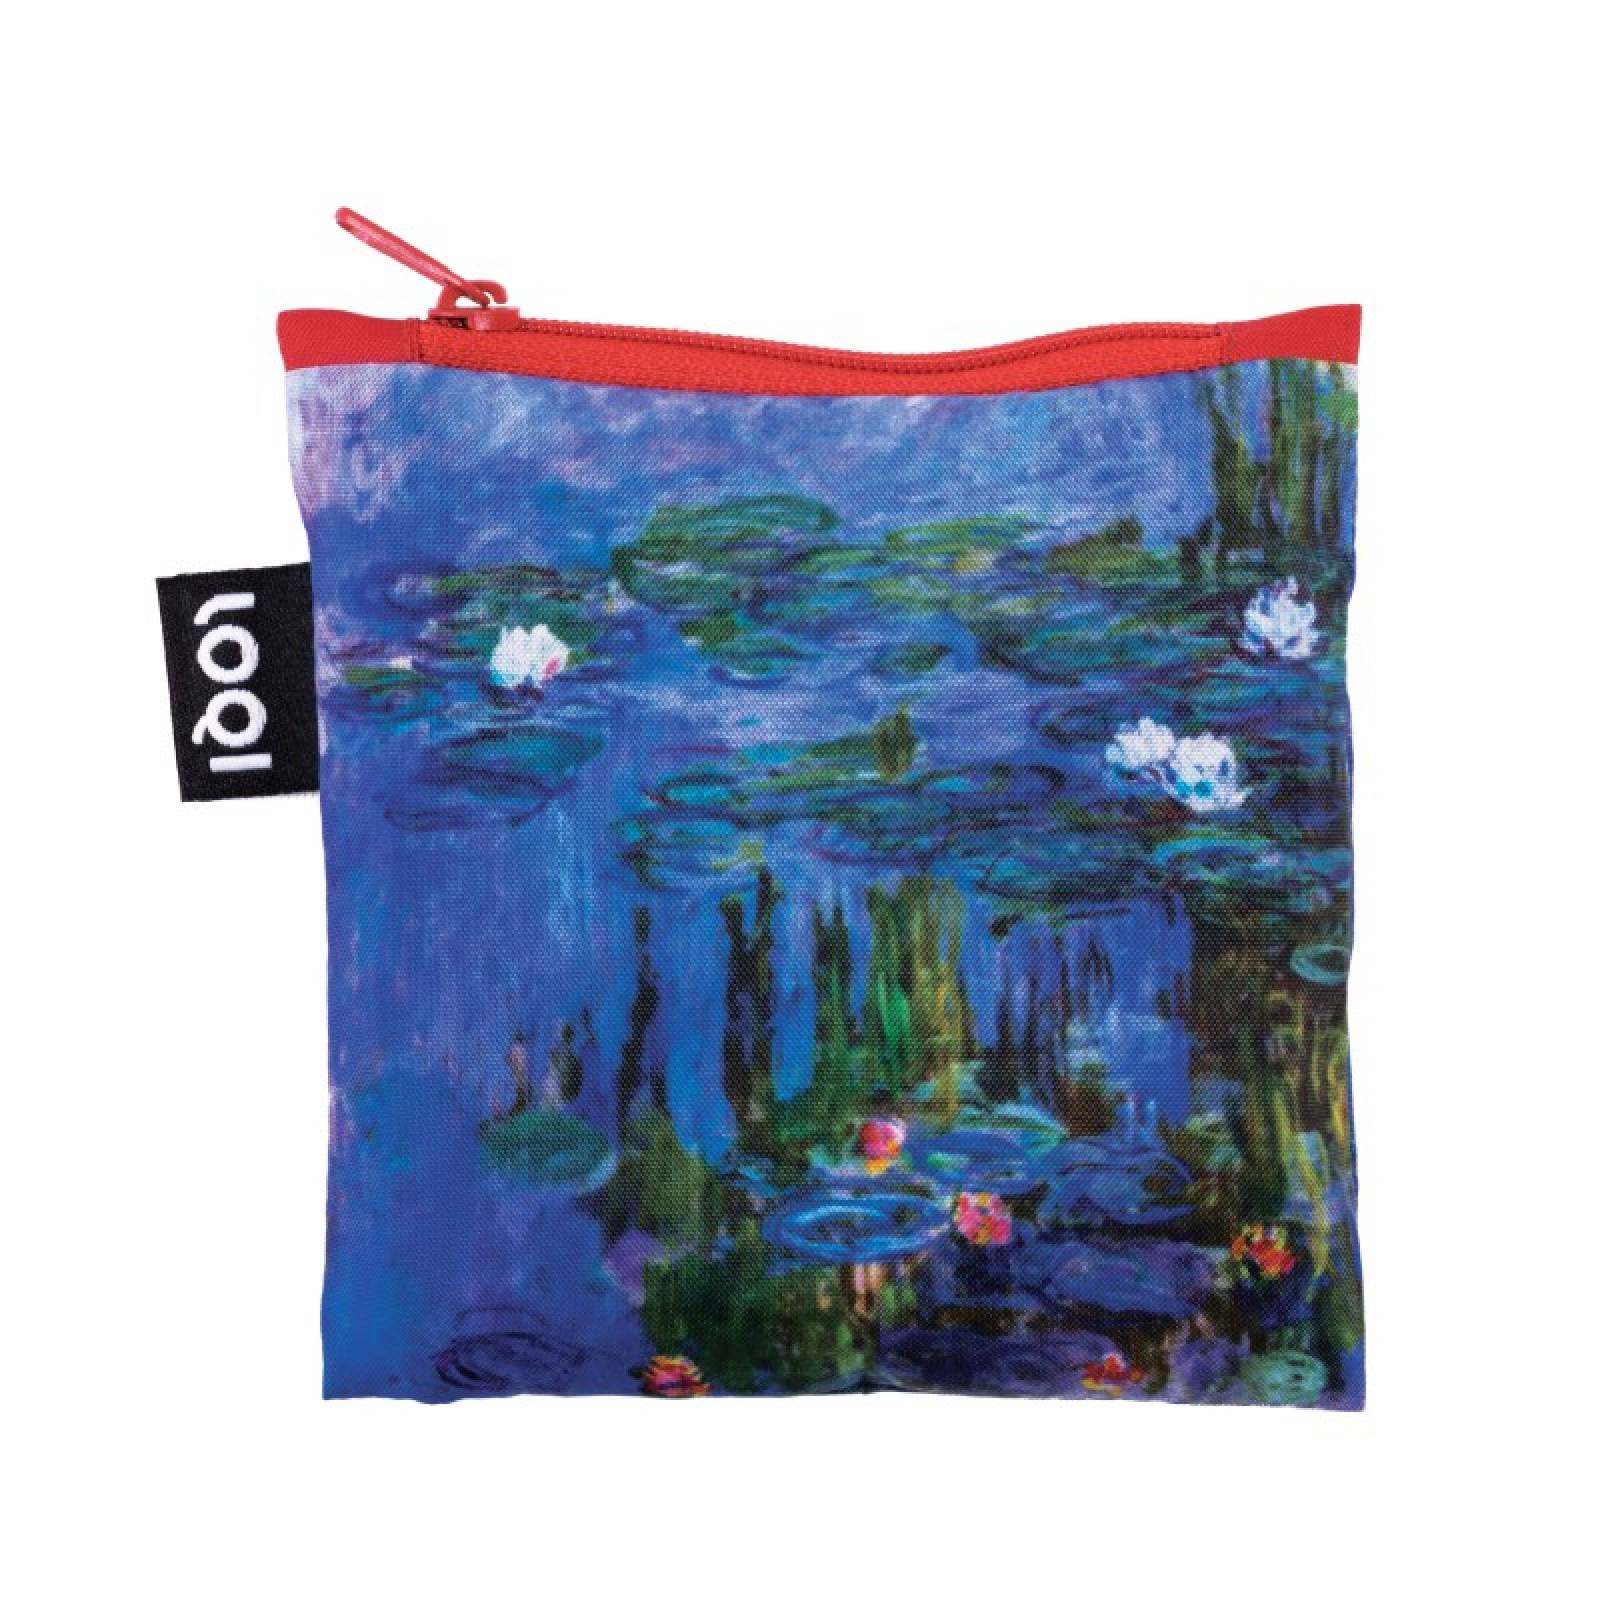 Monet Water Lillies - Eco Tote Bag With Pouch thumbnails